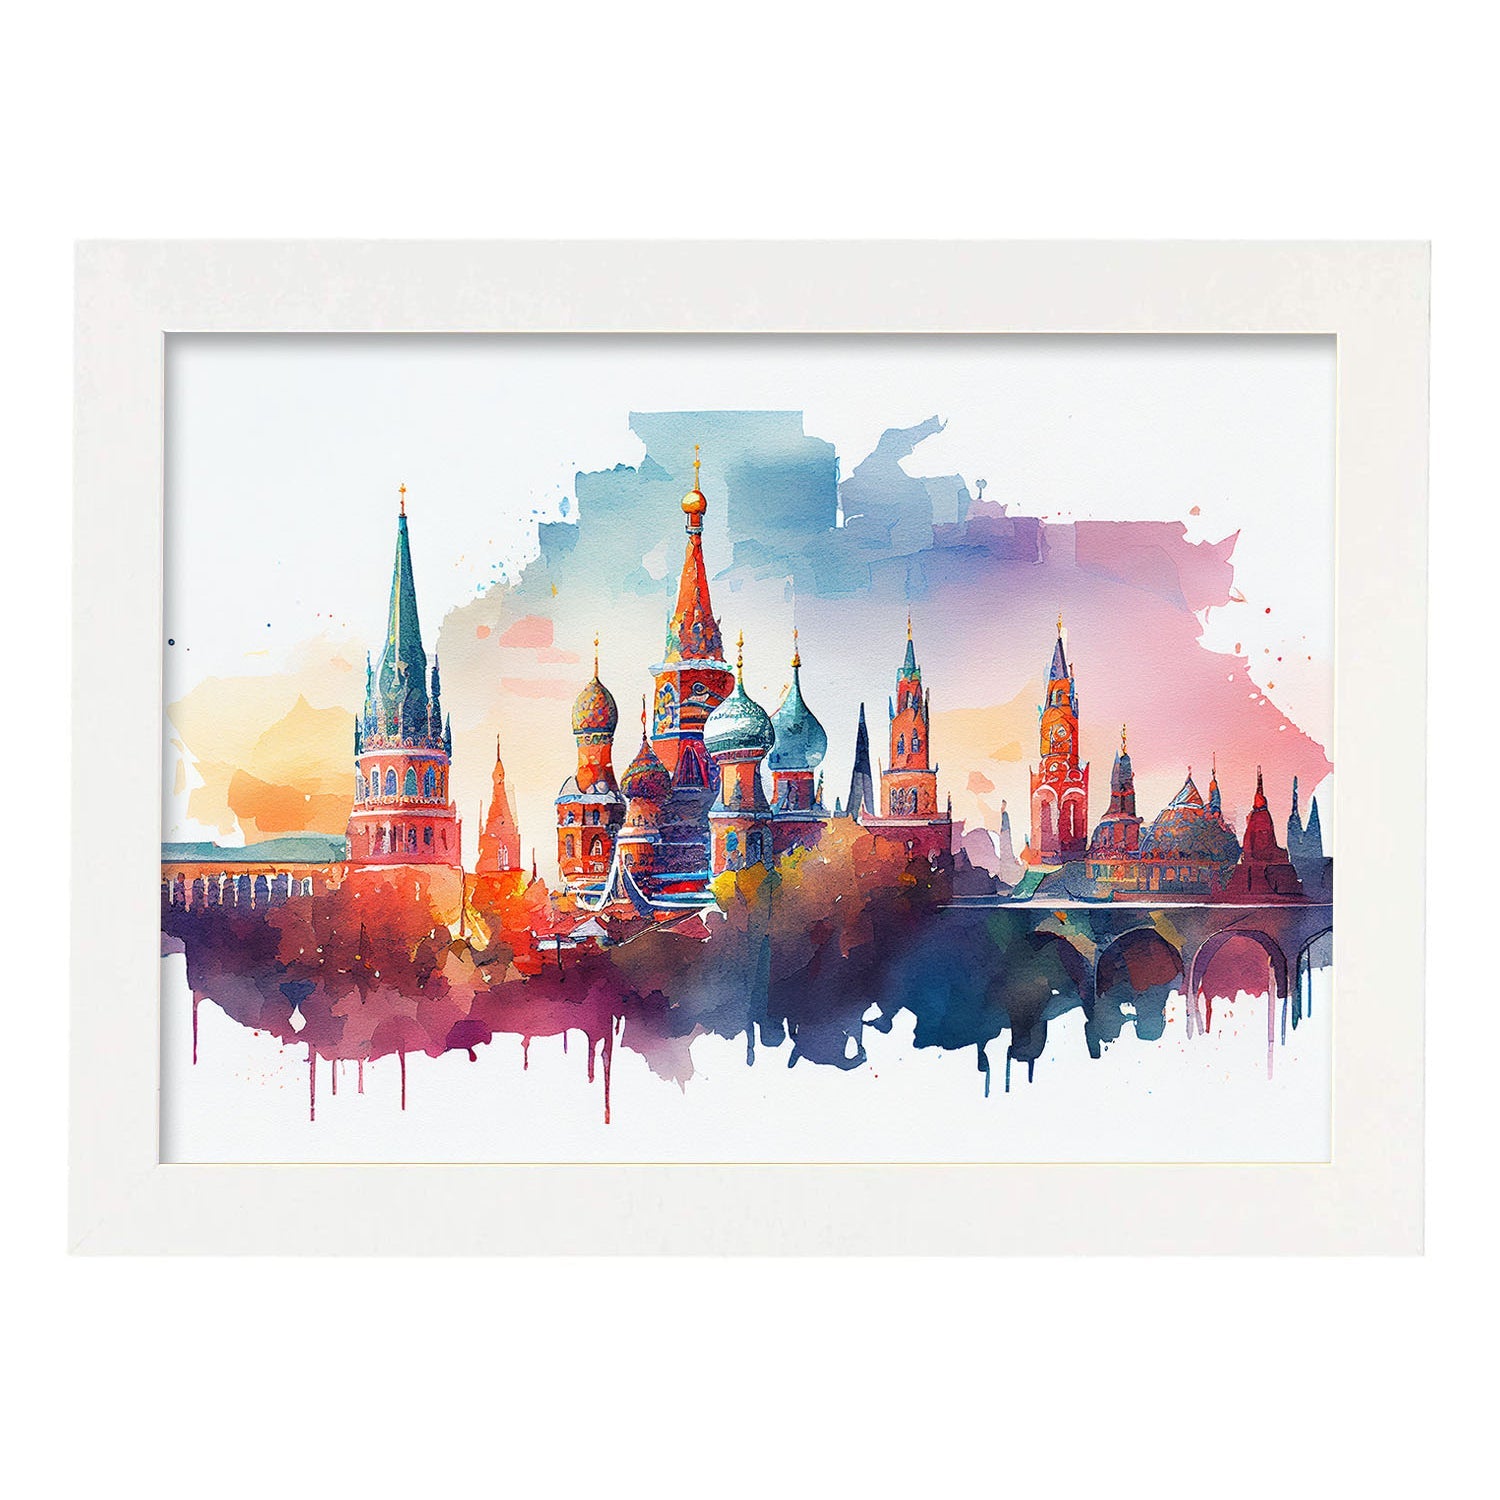 Nacnic watercolor of a skyline of the city of Moscow. Aesthetic Wall Art Prints for Bedroom or Living Room Design.-Artwork-Nacnic-A4-Marco Blanco-Nacnic Estudio SL